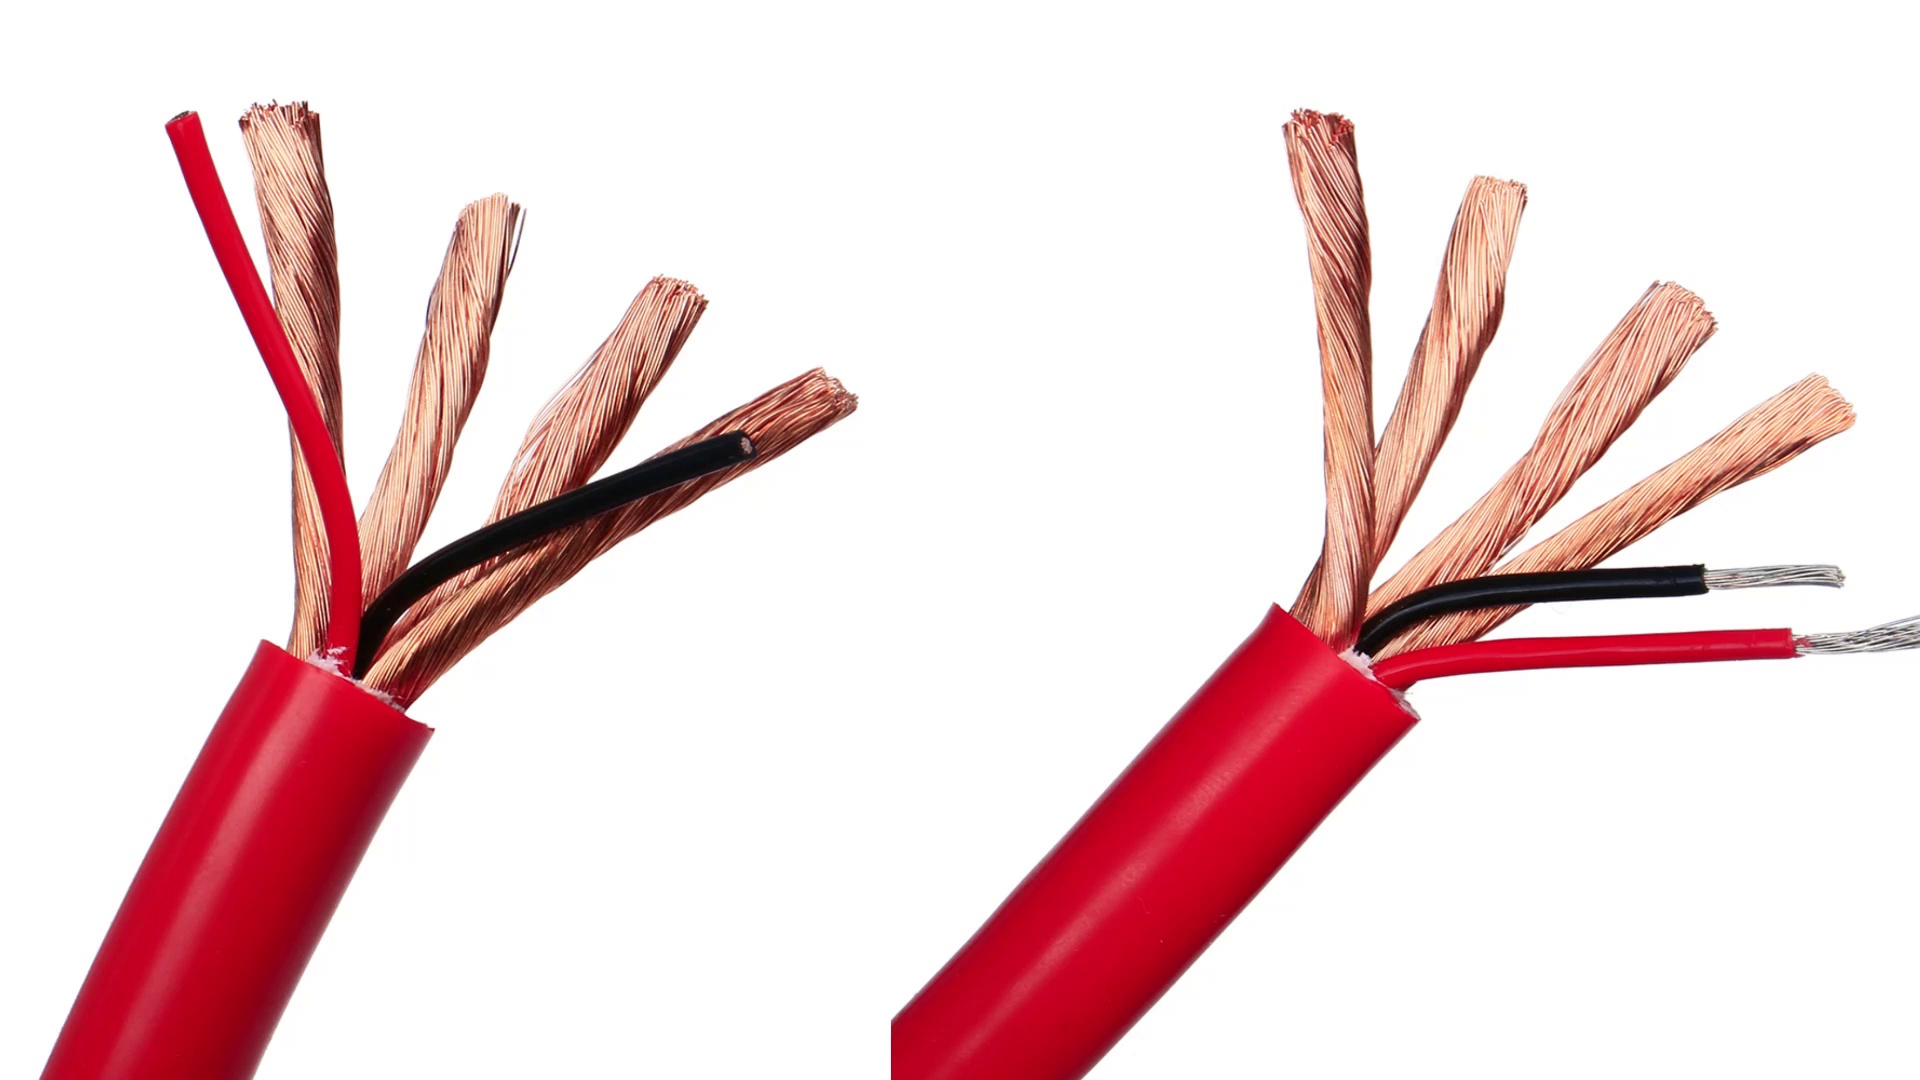 flame retardant cables, fire resistant and flame retardant cables